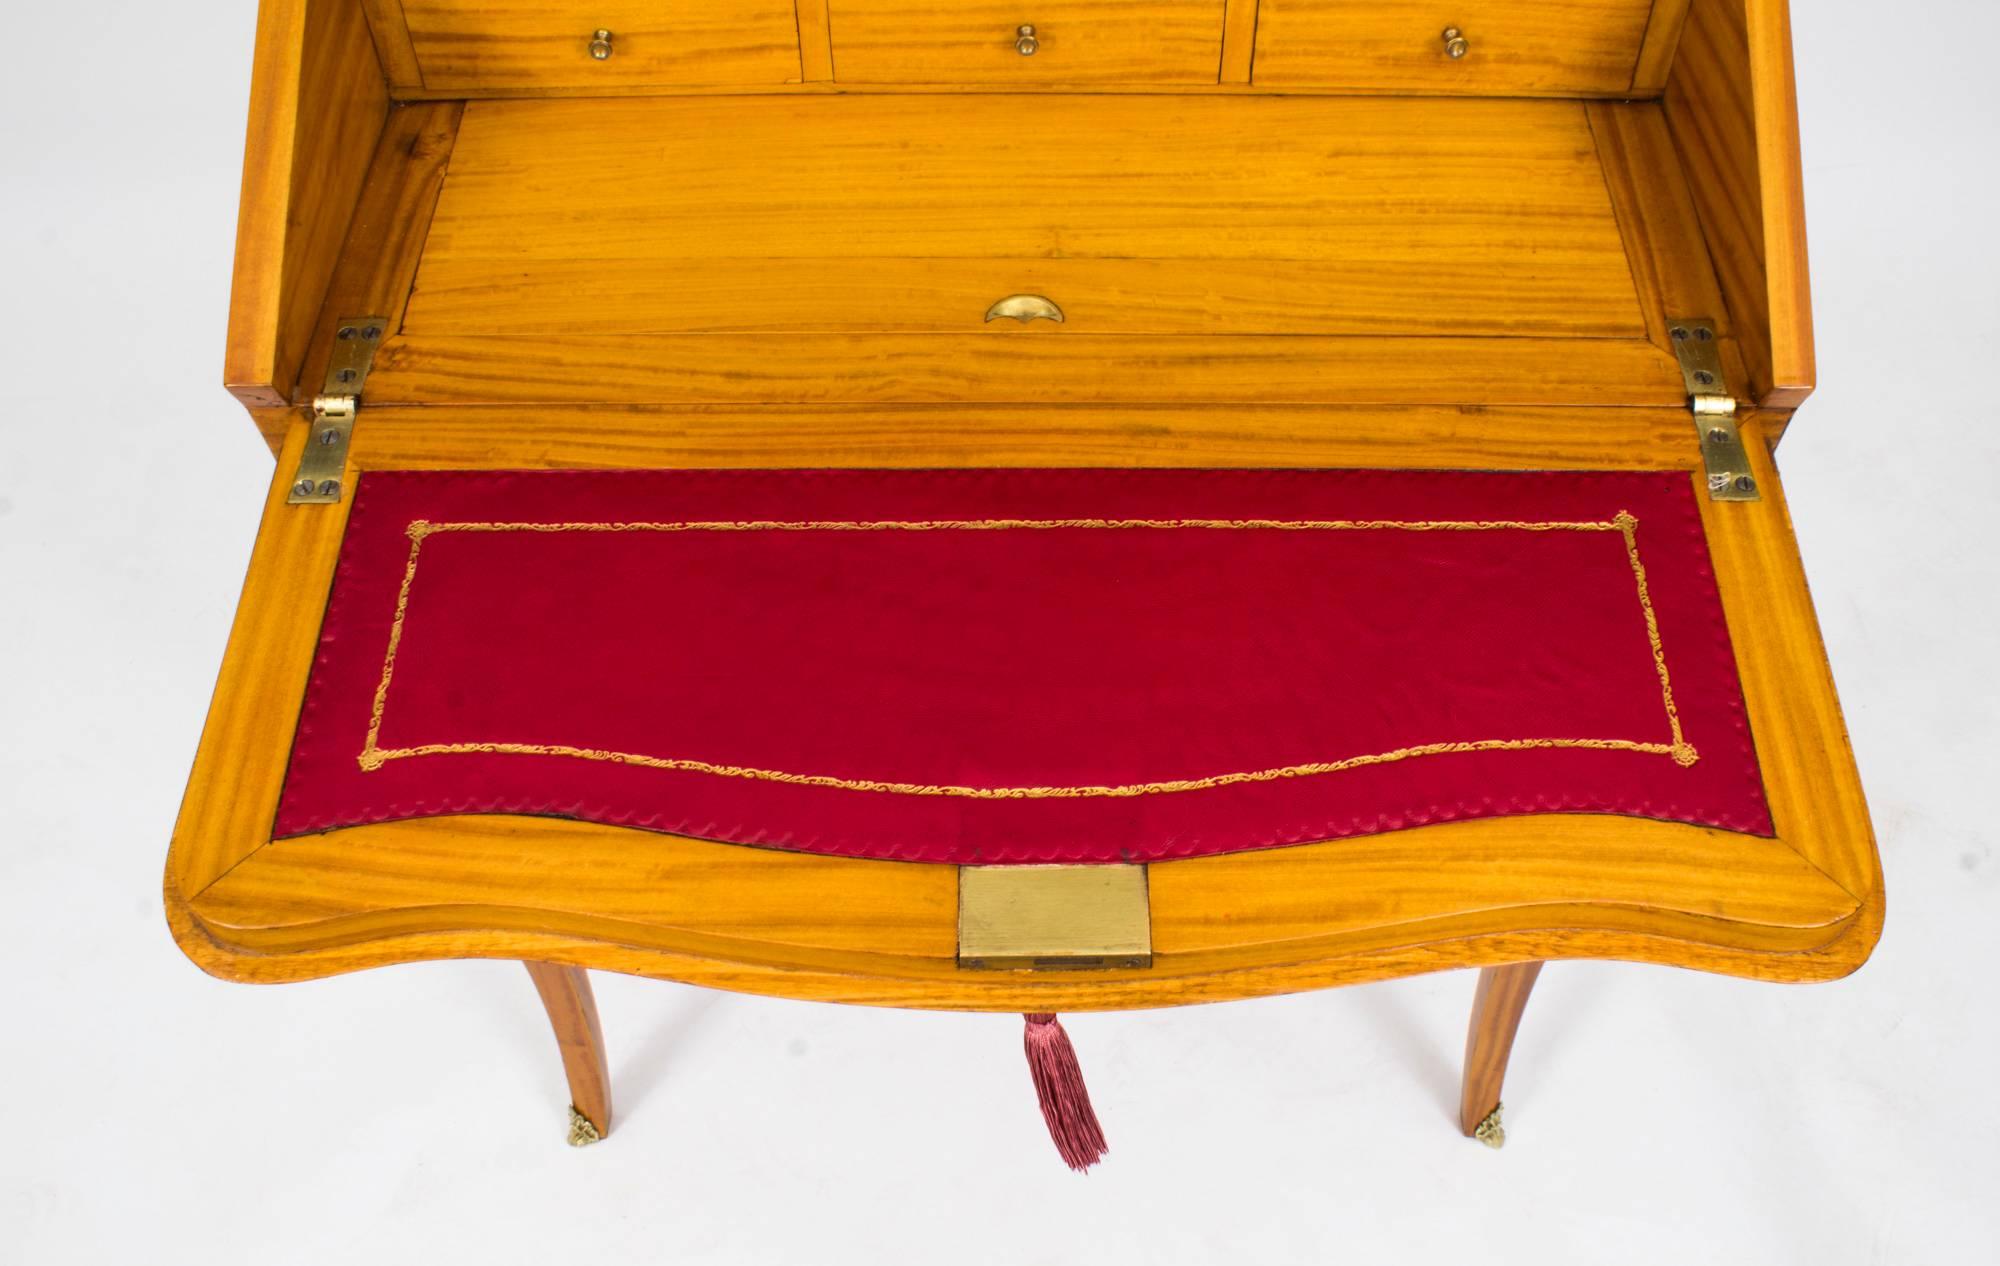 Late 19th Century 19th Century Satinwood and Marquetry Bureau De Dame